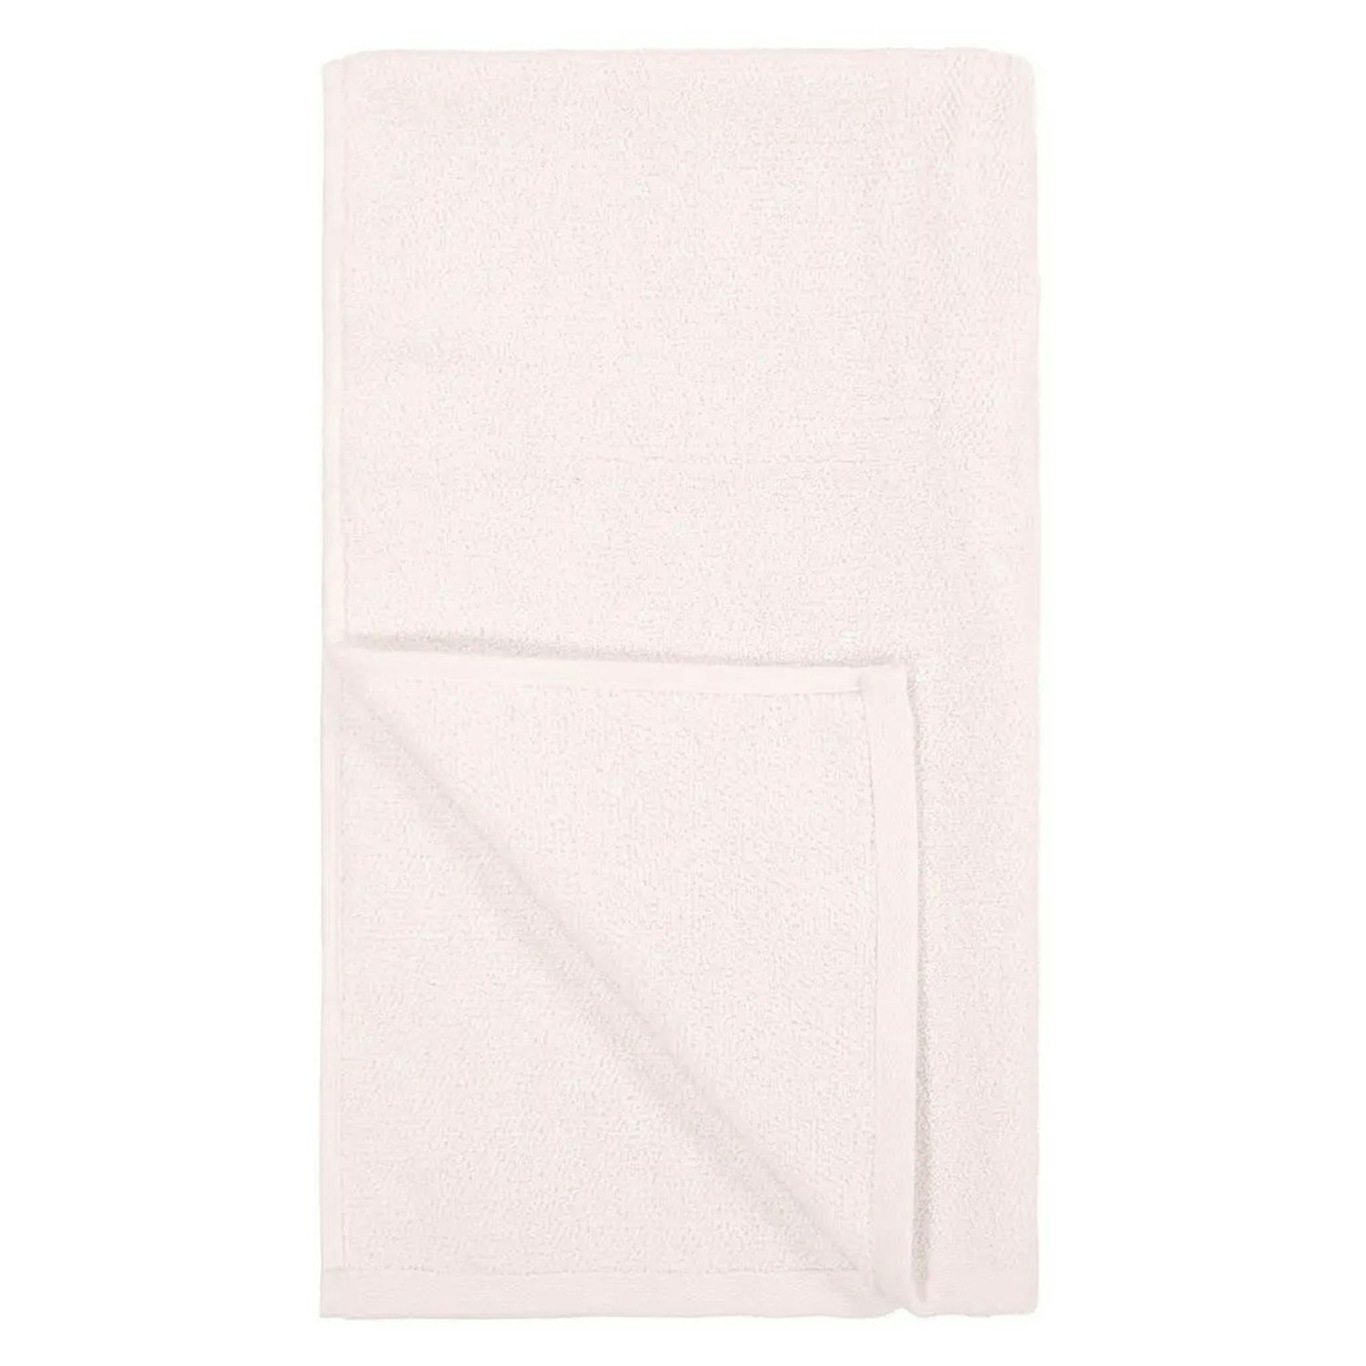 Loweswater Badematte 60x90 cm, Bianco